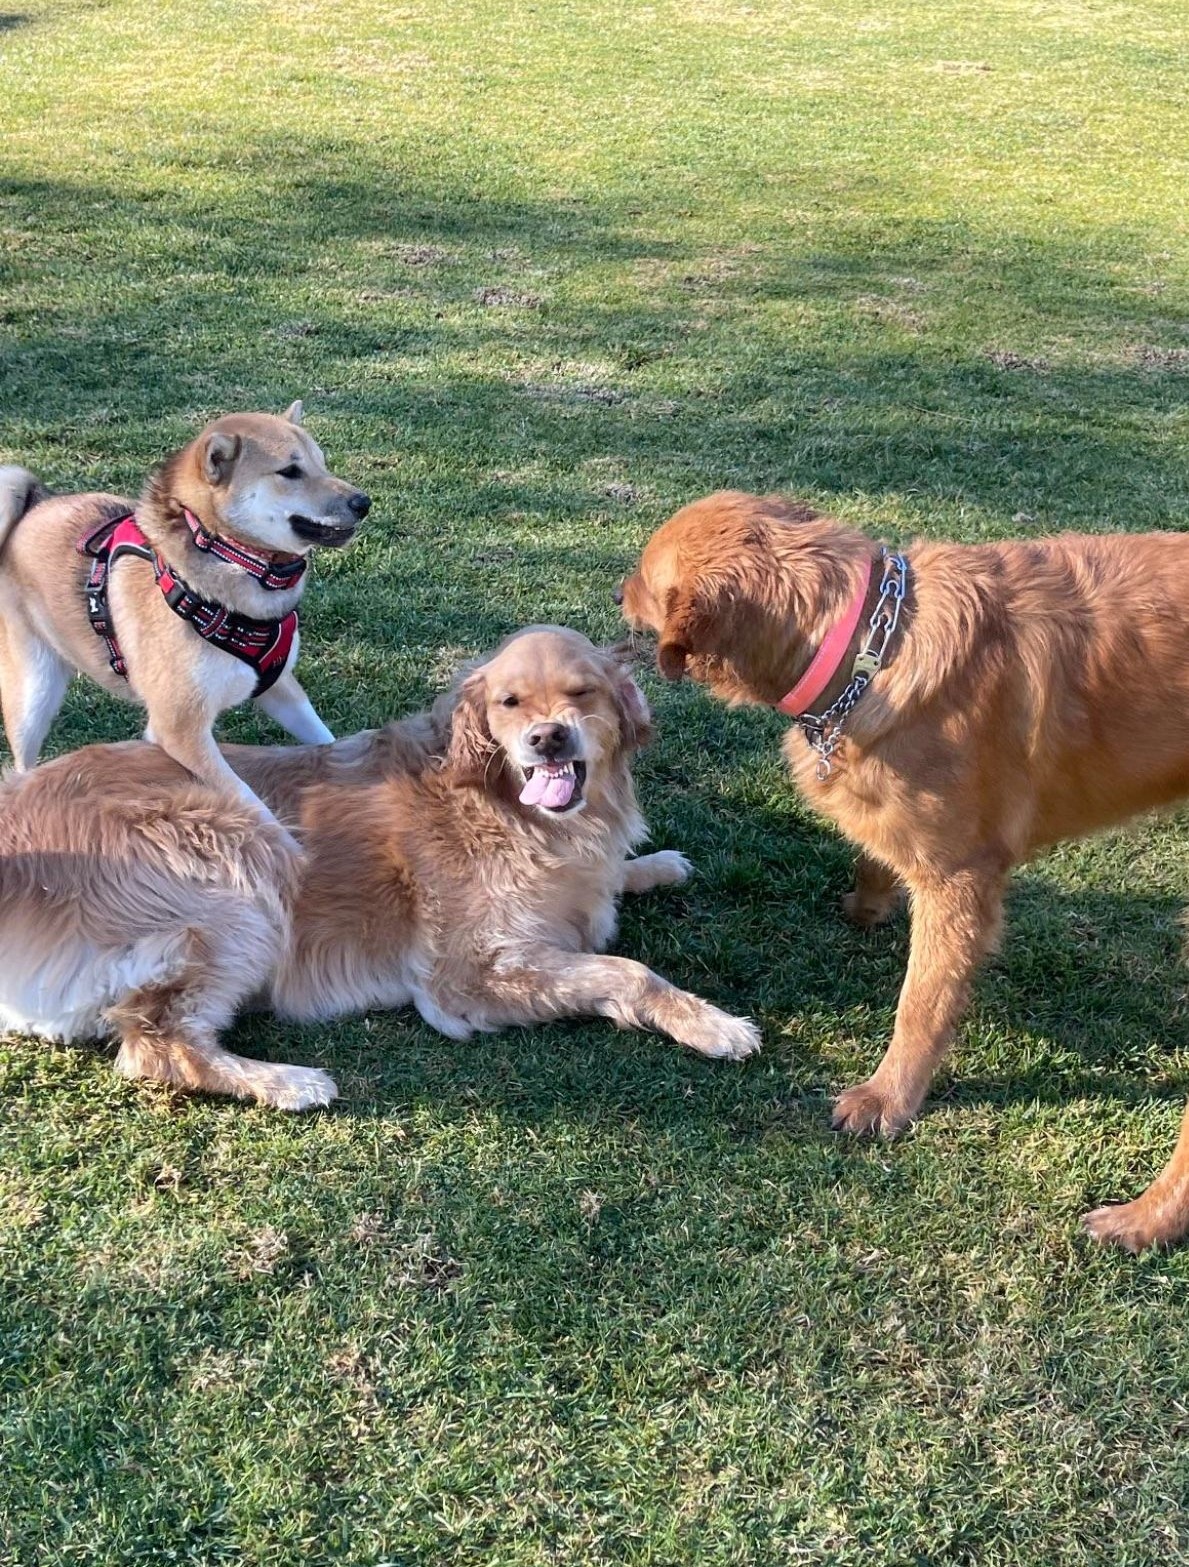 brown shiba inu standing next to a golden retriever laying on grass with the tongue sticking out in a growl and another golden retriever standing next to them